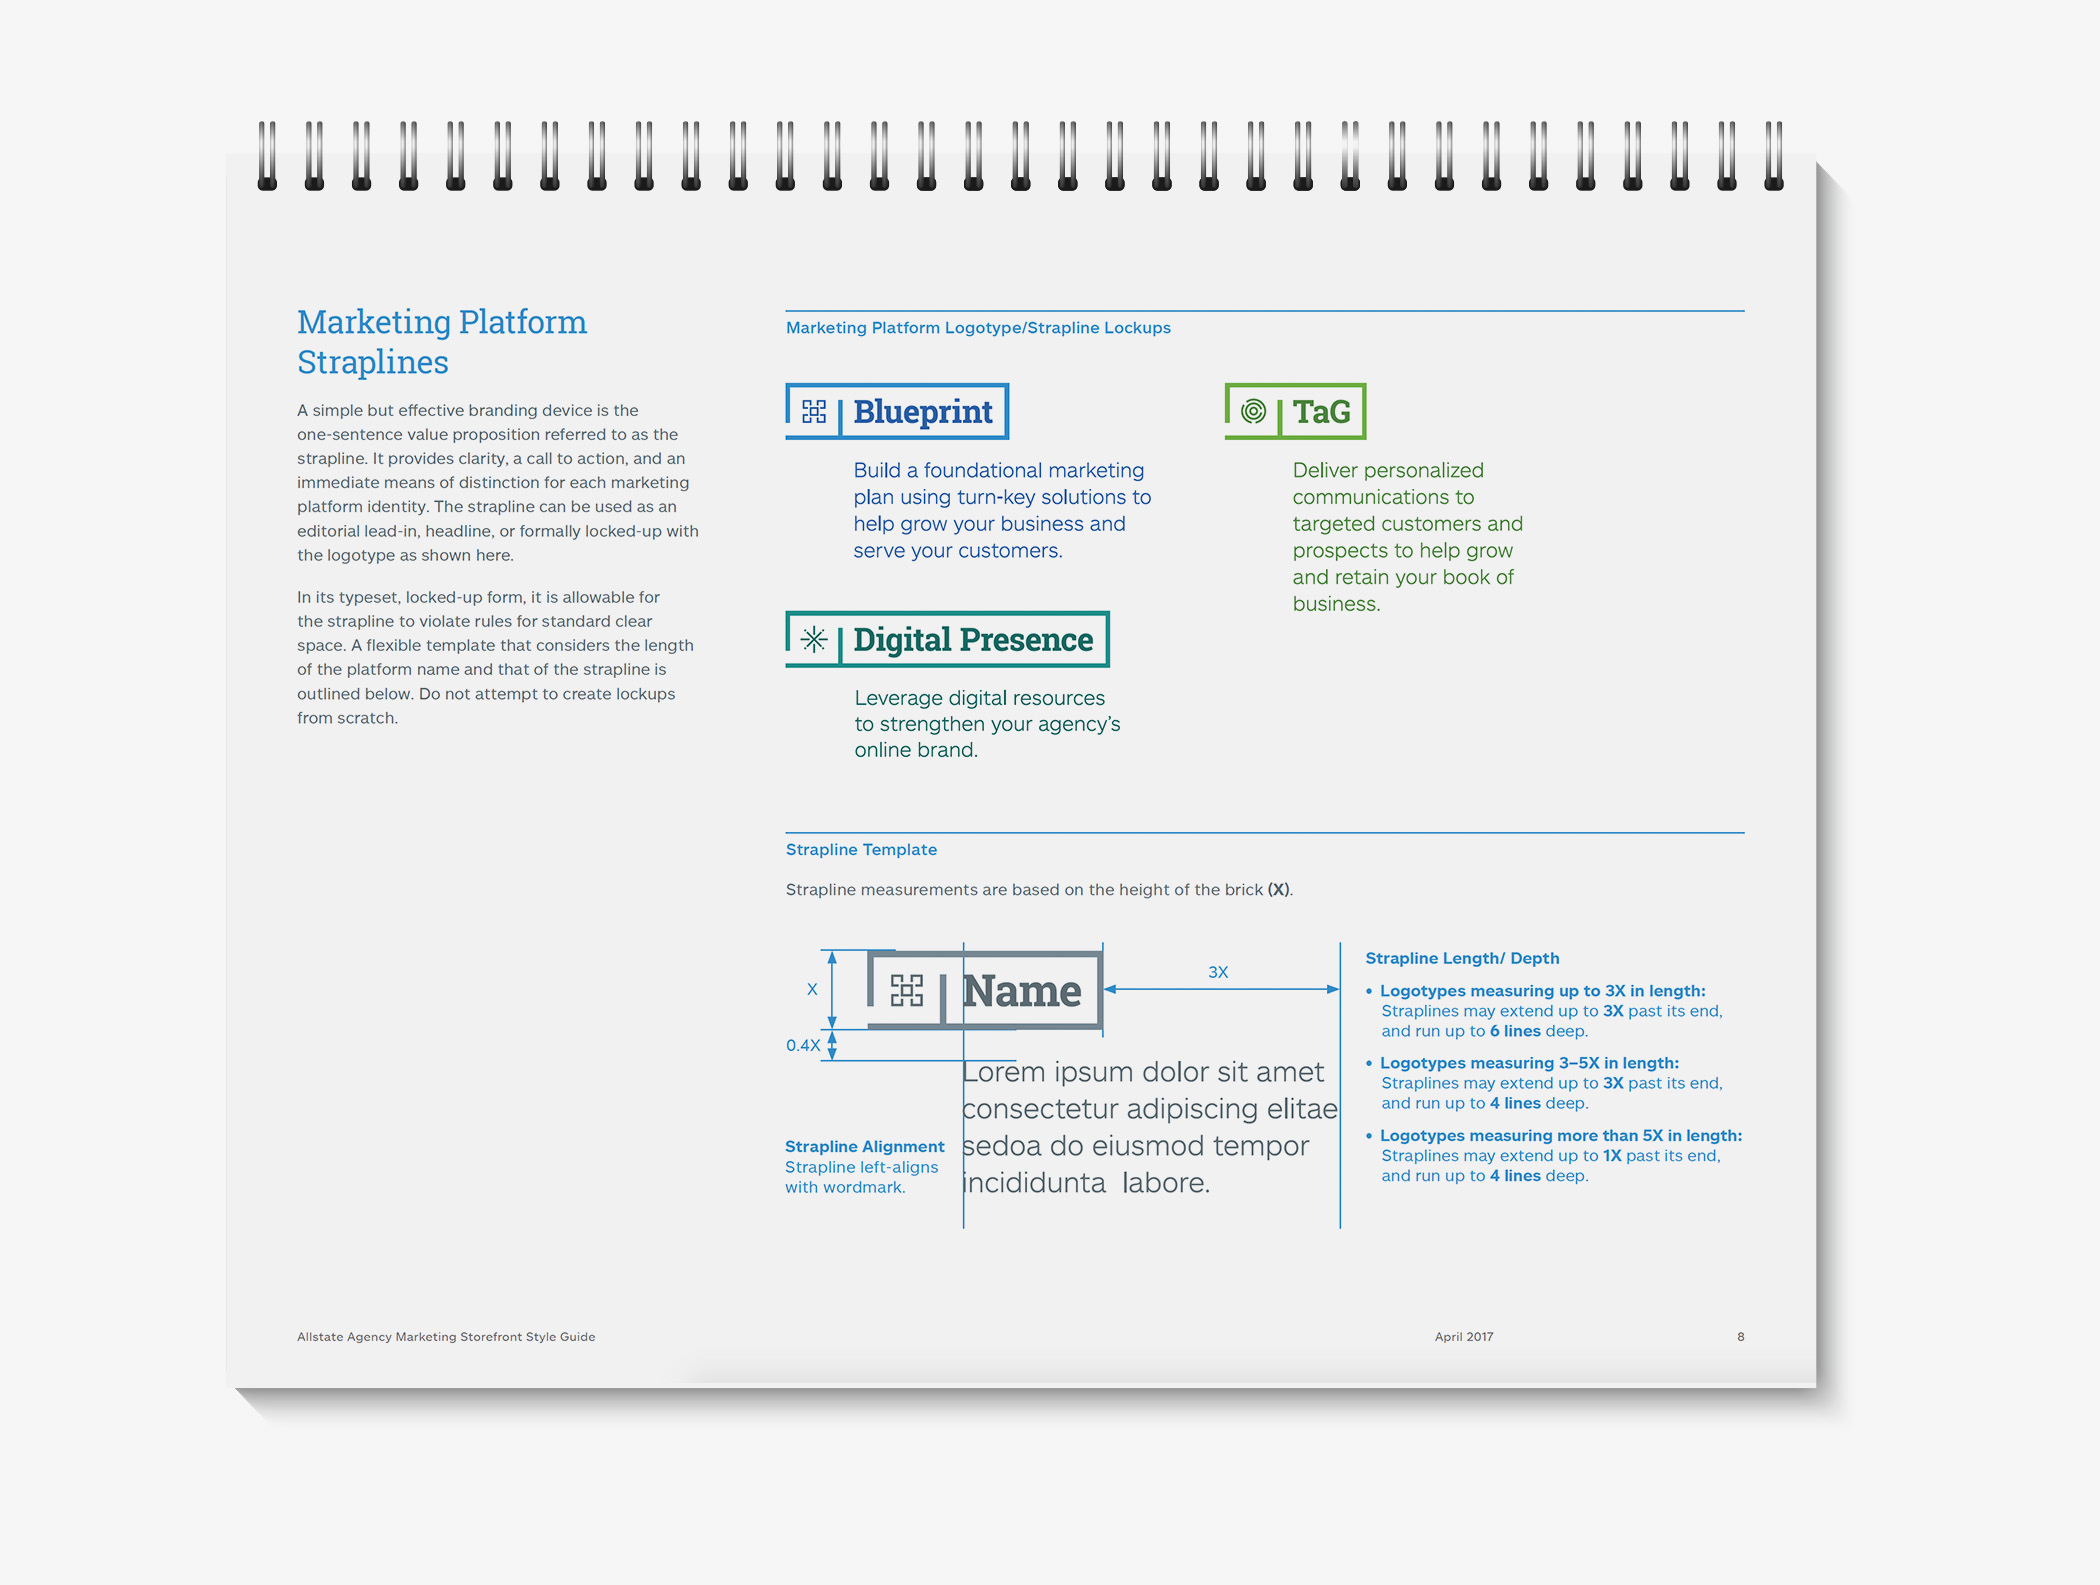 Page from the Allstate Agency Marketing Storefront brand guide showing template for marketing platform straplines.